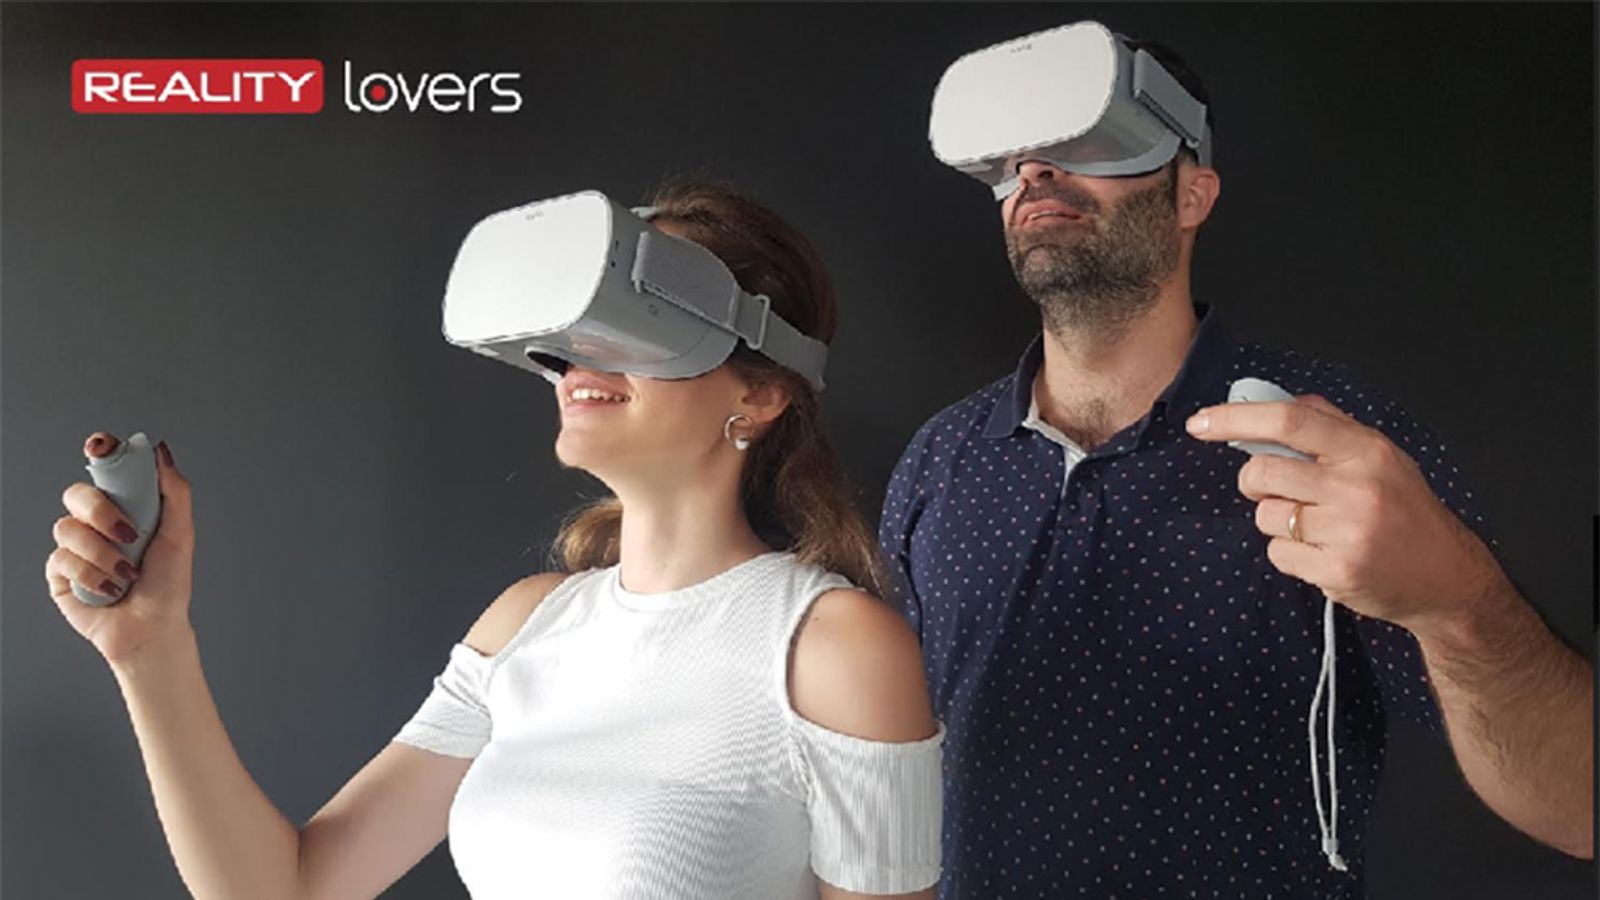 Reality Lovers VR Promotes Oculus Go, 'The Great VR Enabler'